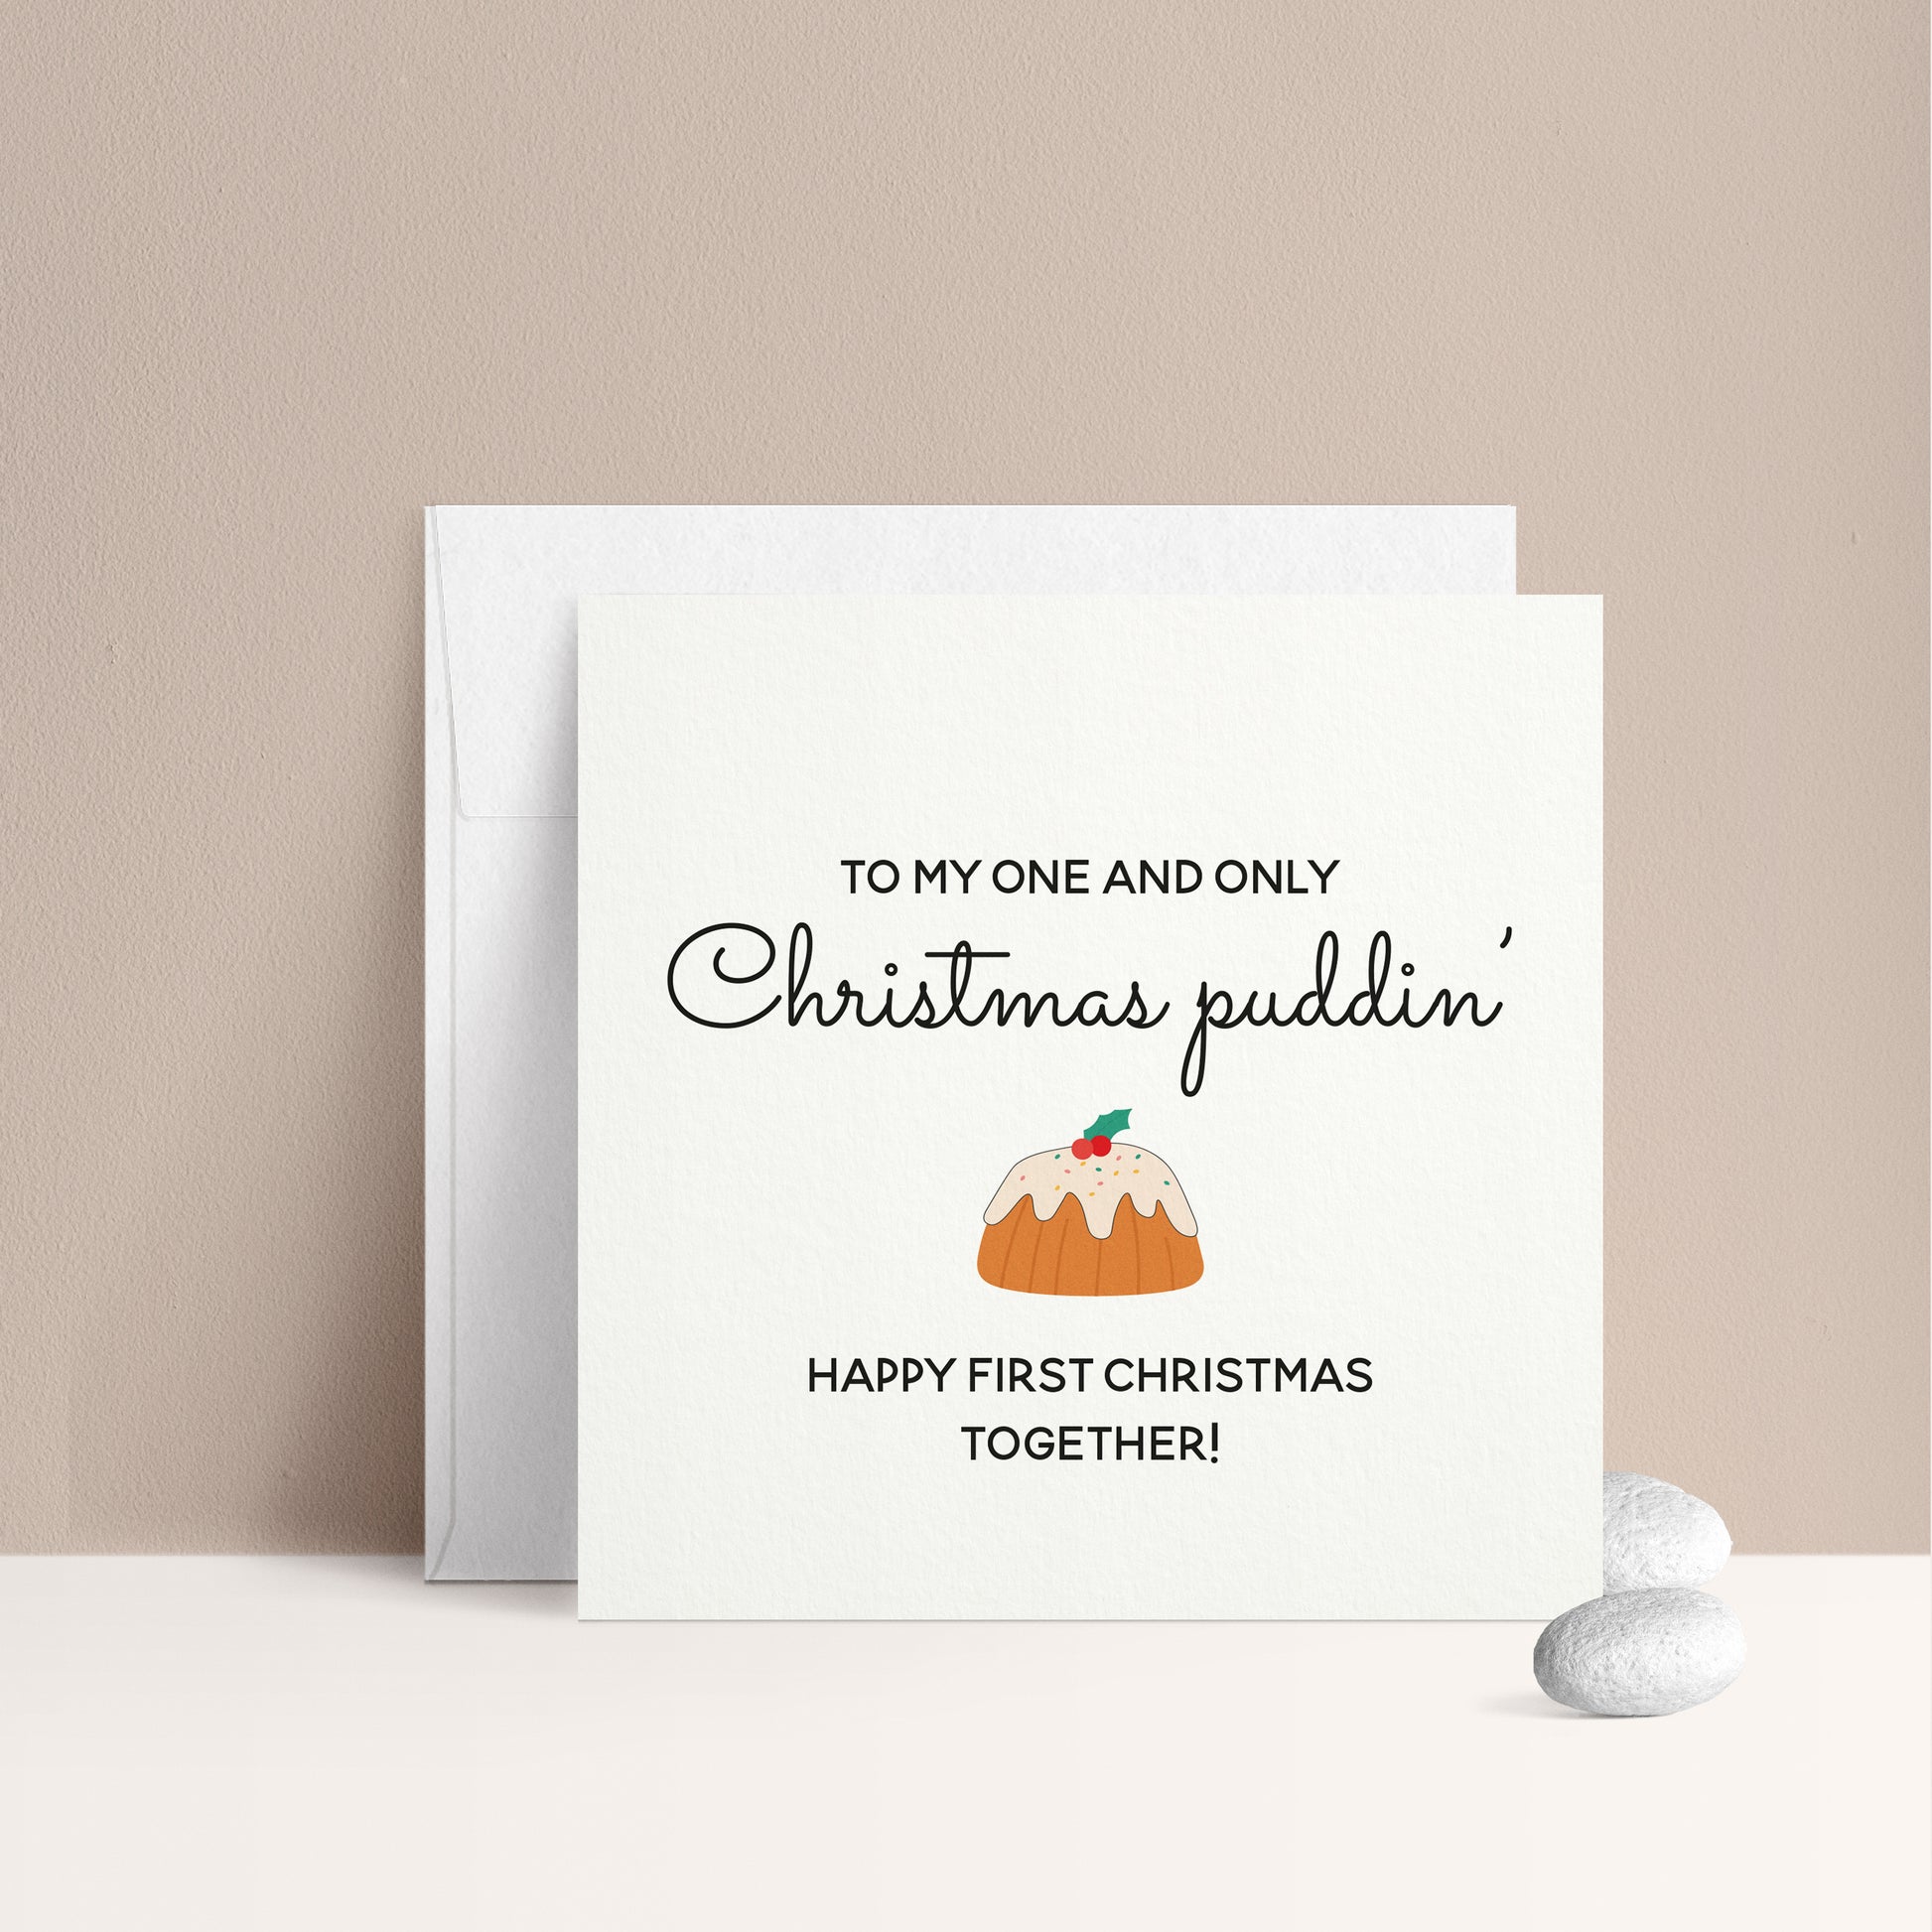 first christmas together anniversary card for him or her - XOXOKristen